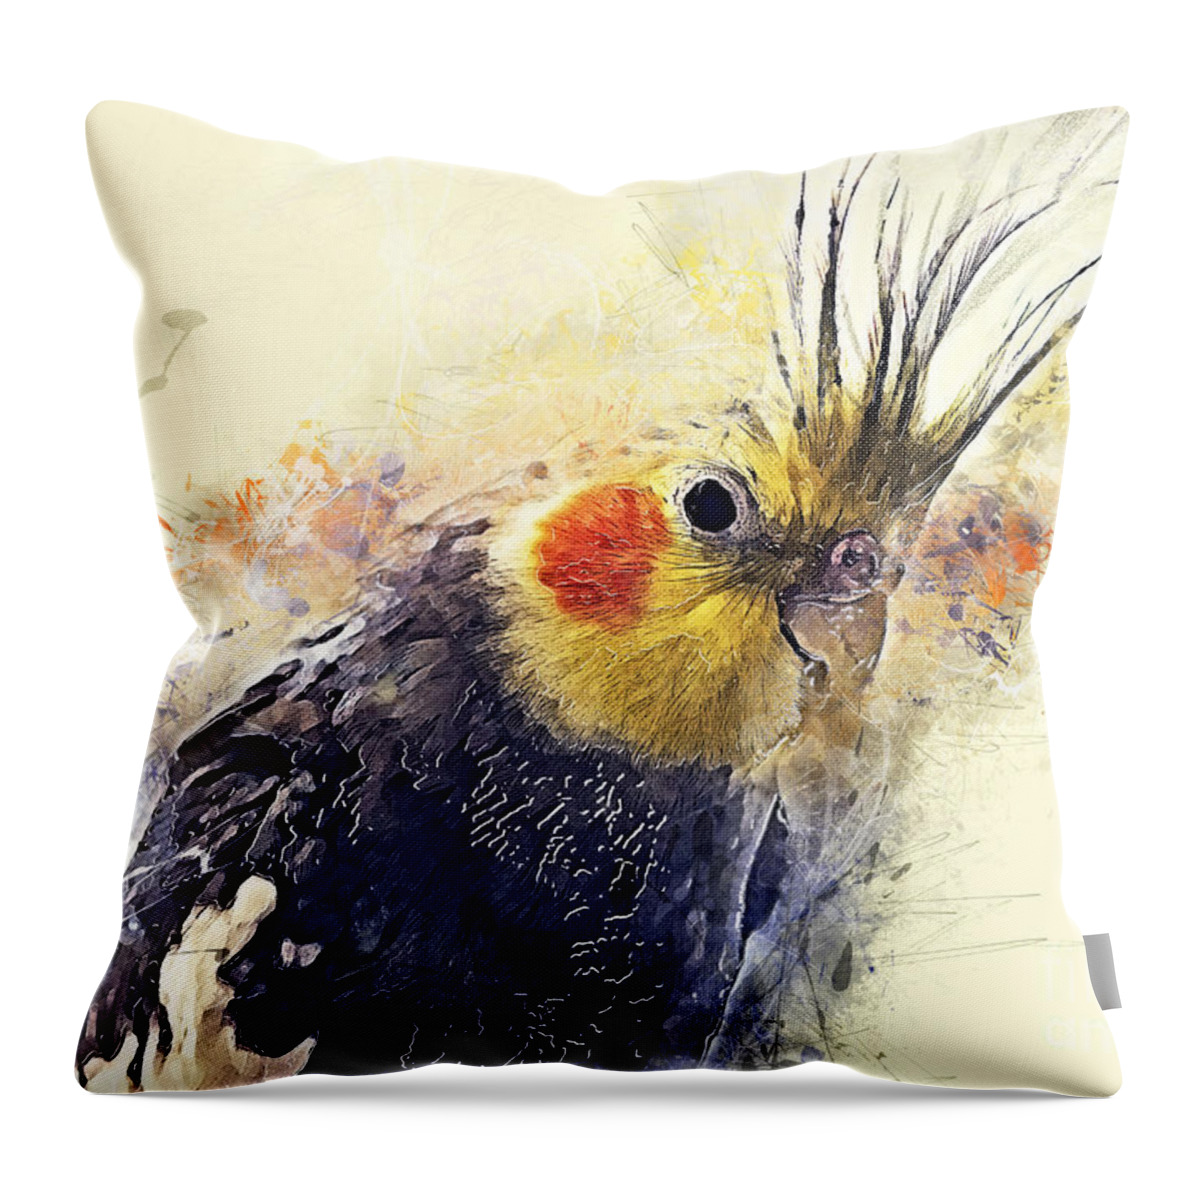 Cockatiel Throw Pillow featuring the painting Cockatiel Watercolor Art by Justyna Jaszke JBJart